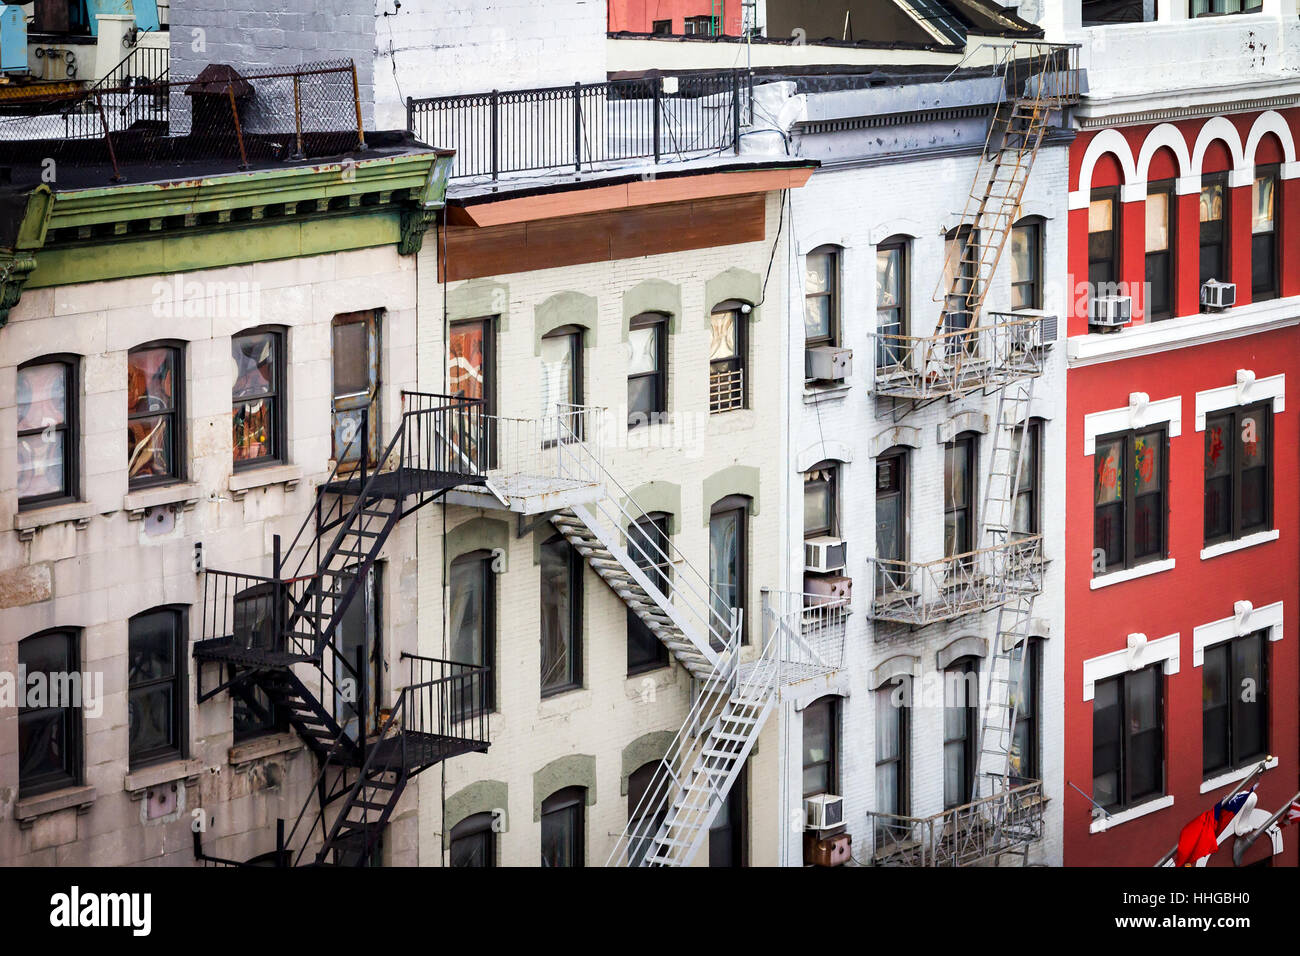 New York City view of historic buildings with windows, rooftops and fire escapes along Bowery street in Chinatown Manhattan Stock Photo